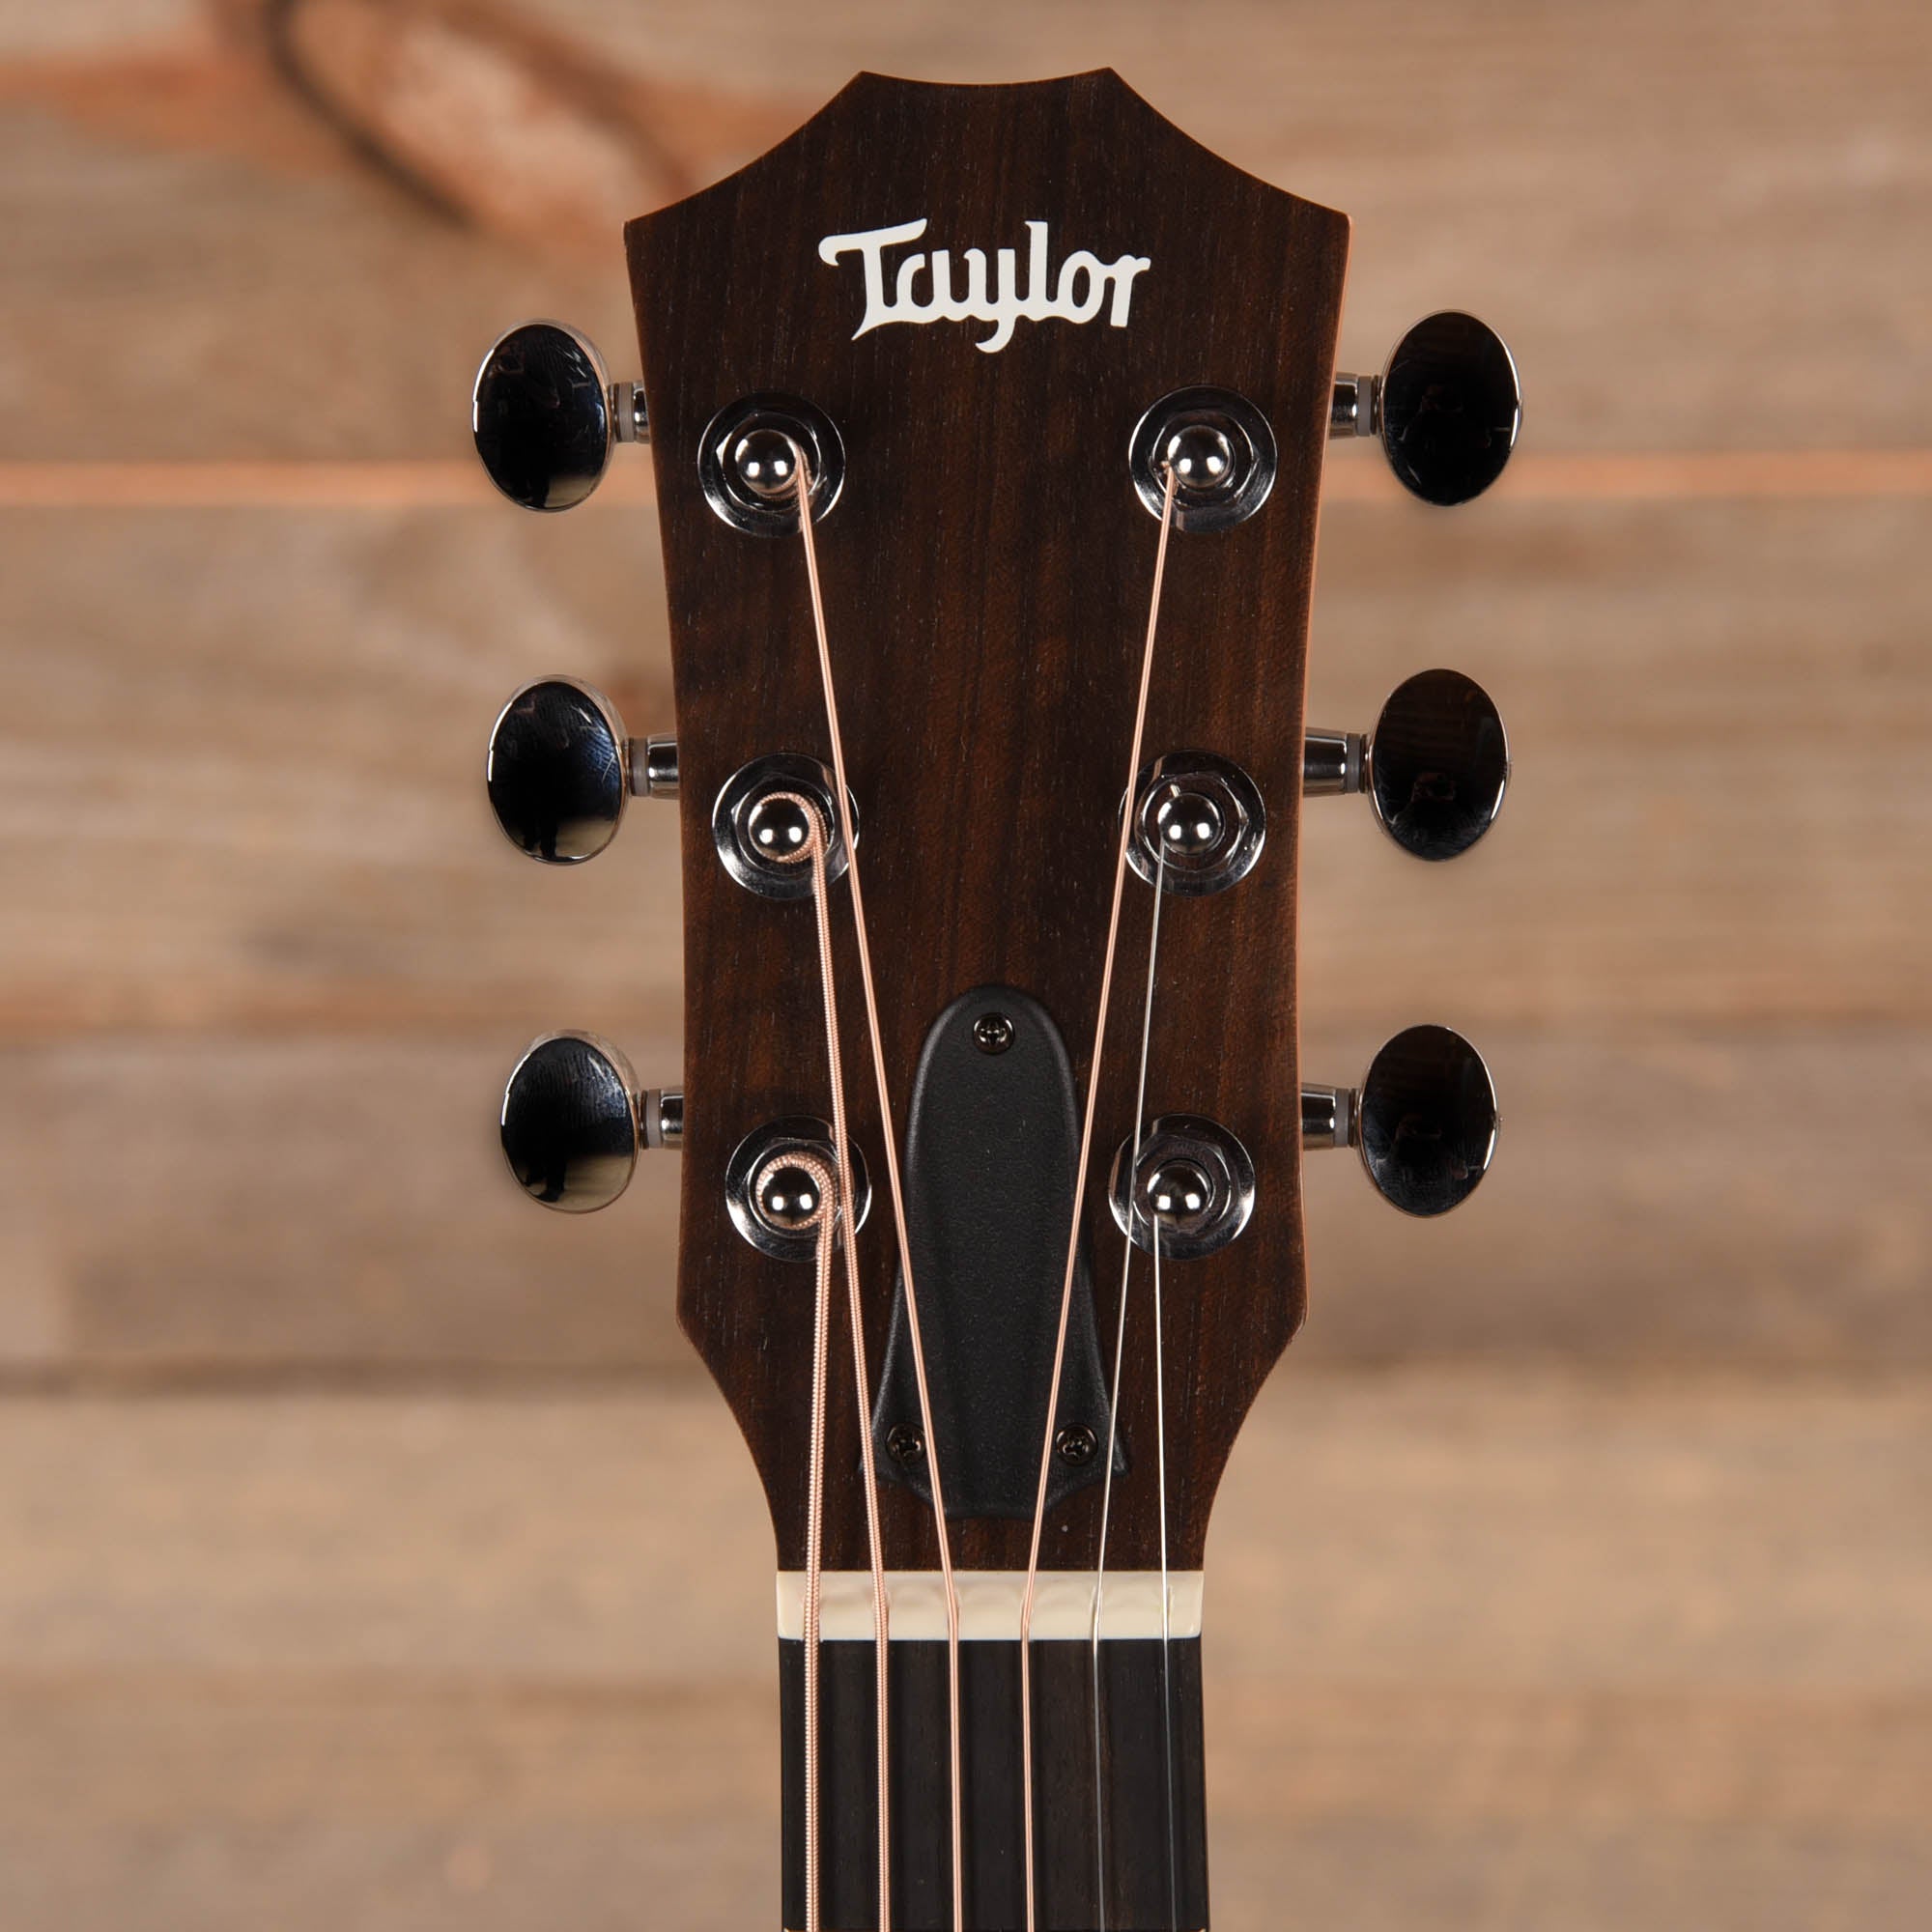 Taylor GS Mini Torrefied Spruce/Sapele Natural